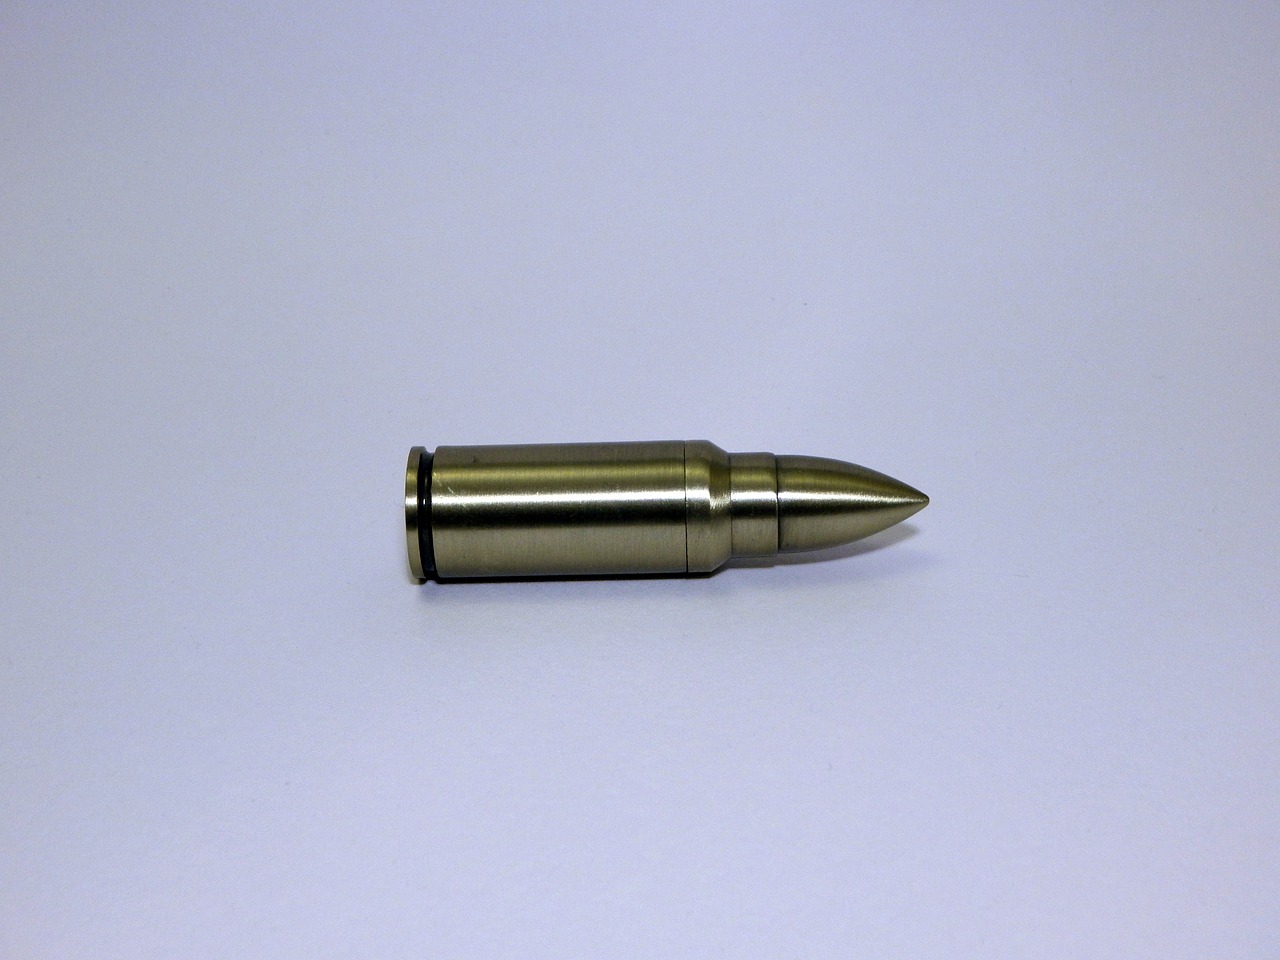 Stock image of bullet for illustration purposes only. (Photo: Pixabay)